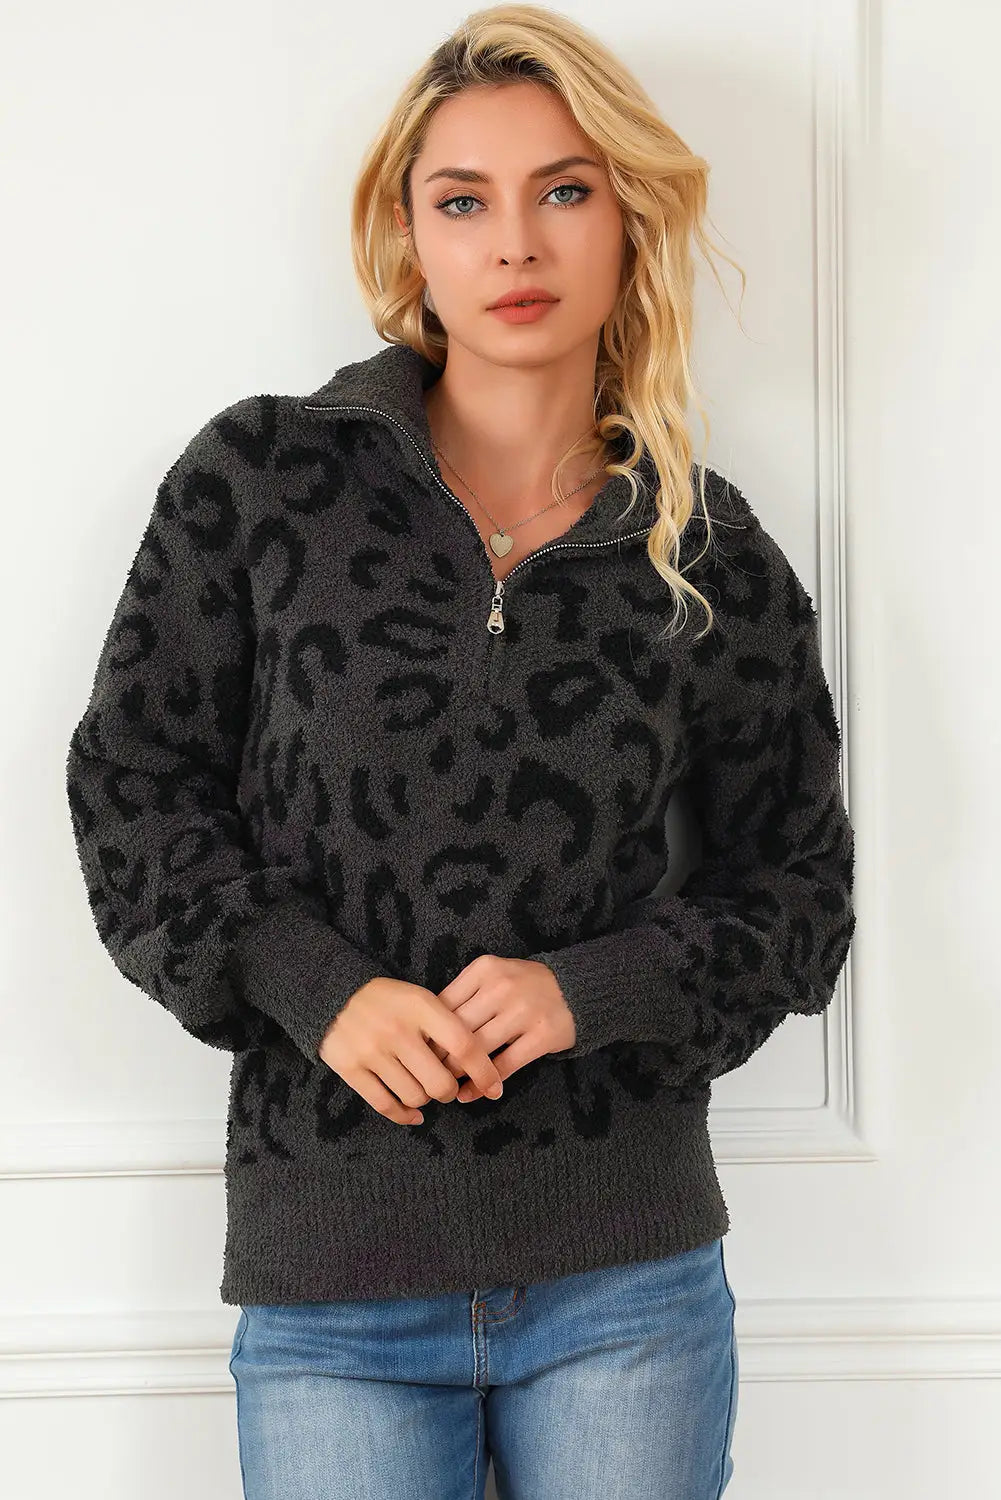 Leopard animal print zipped collared sweater - sweaters & cardigans